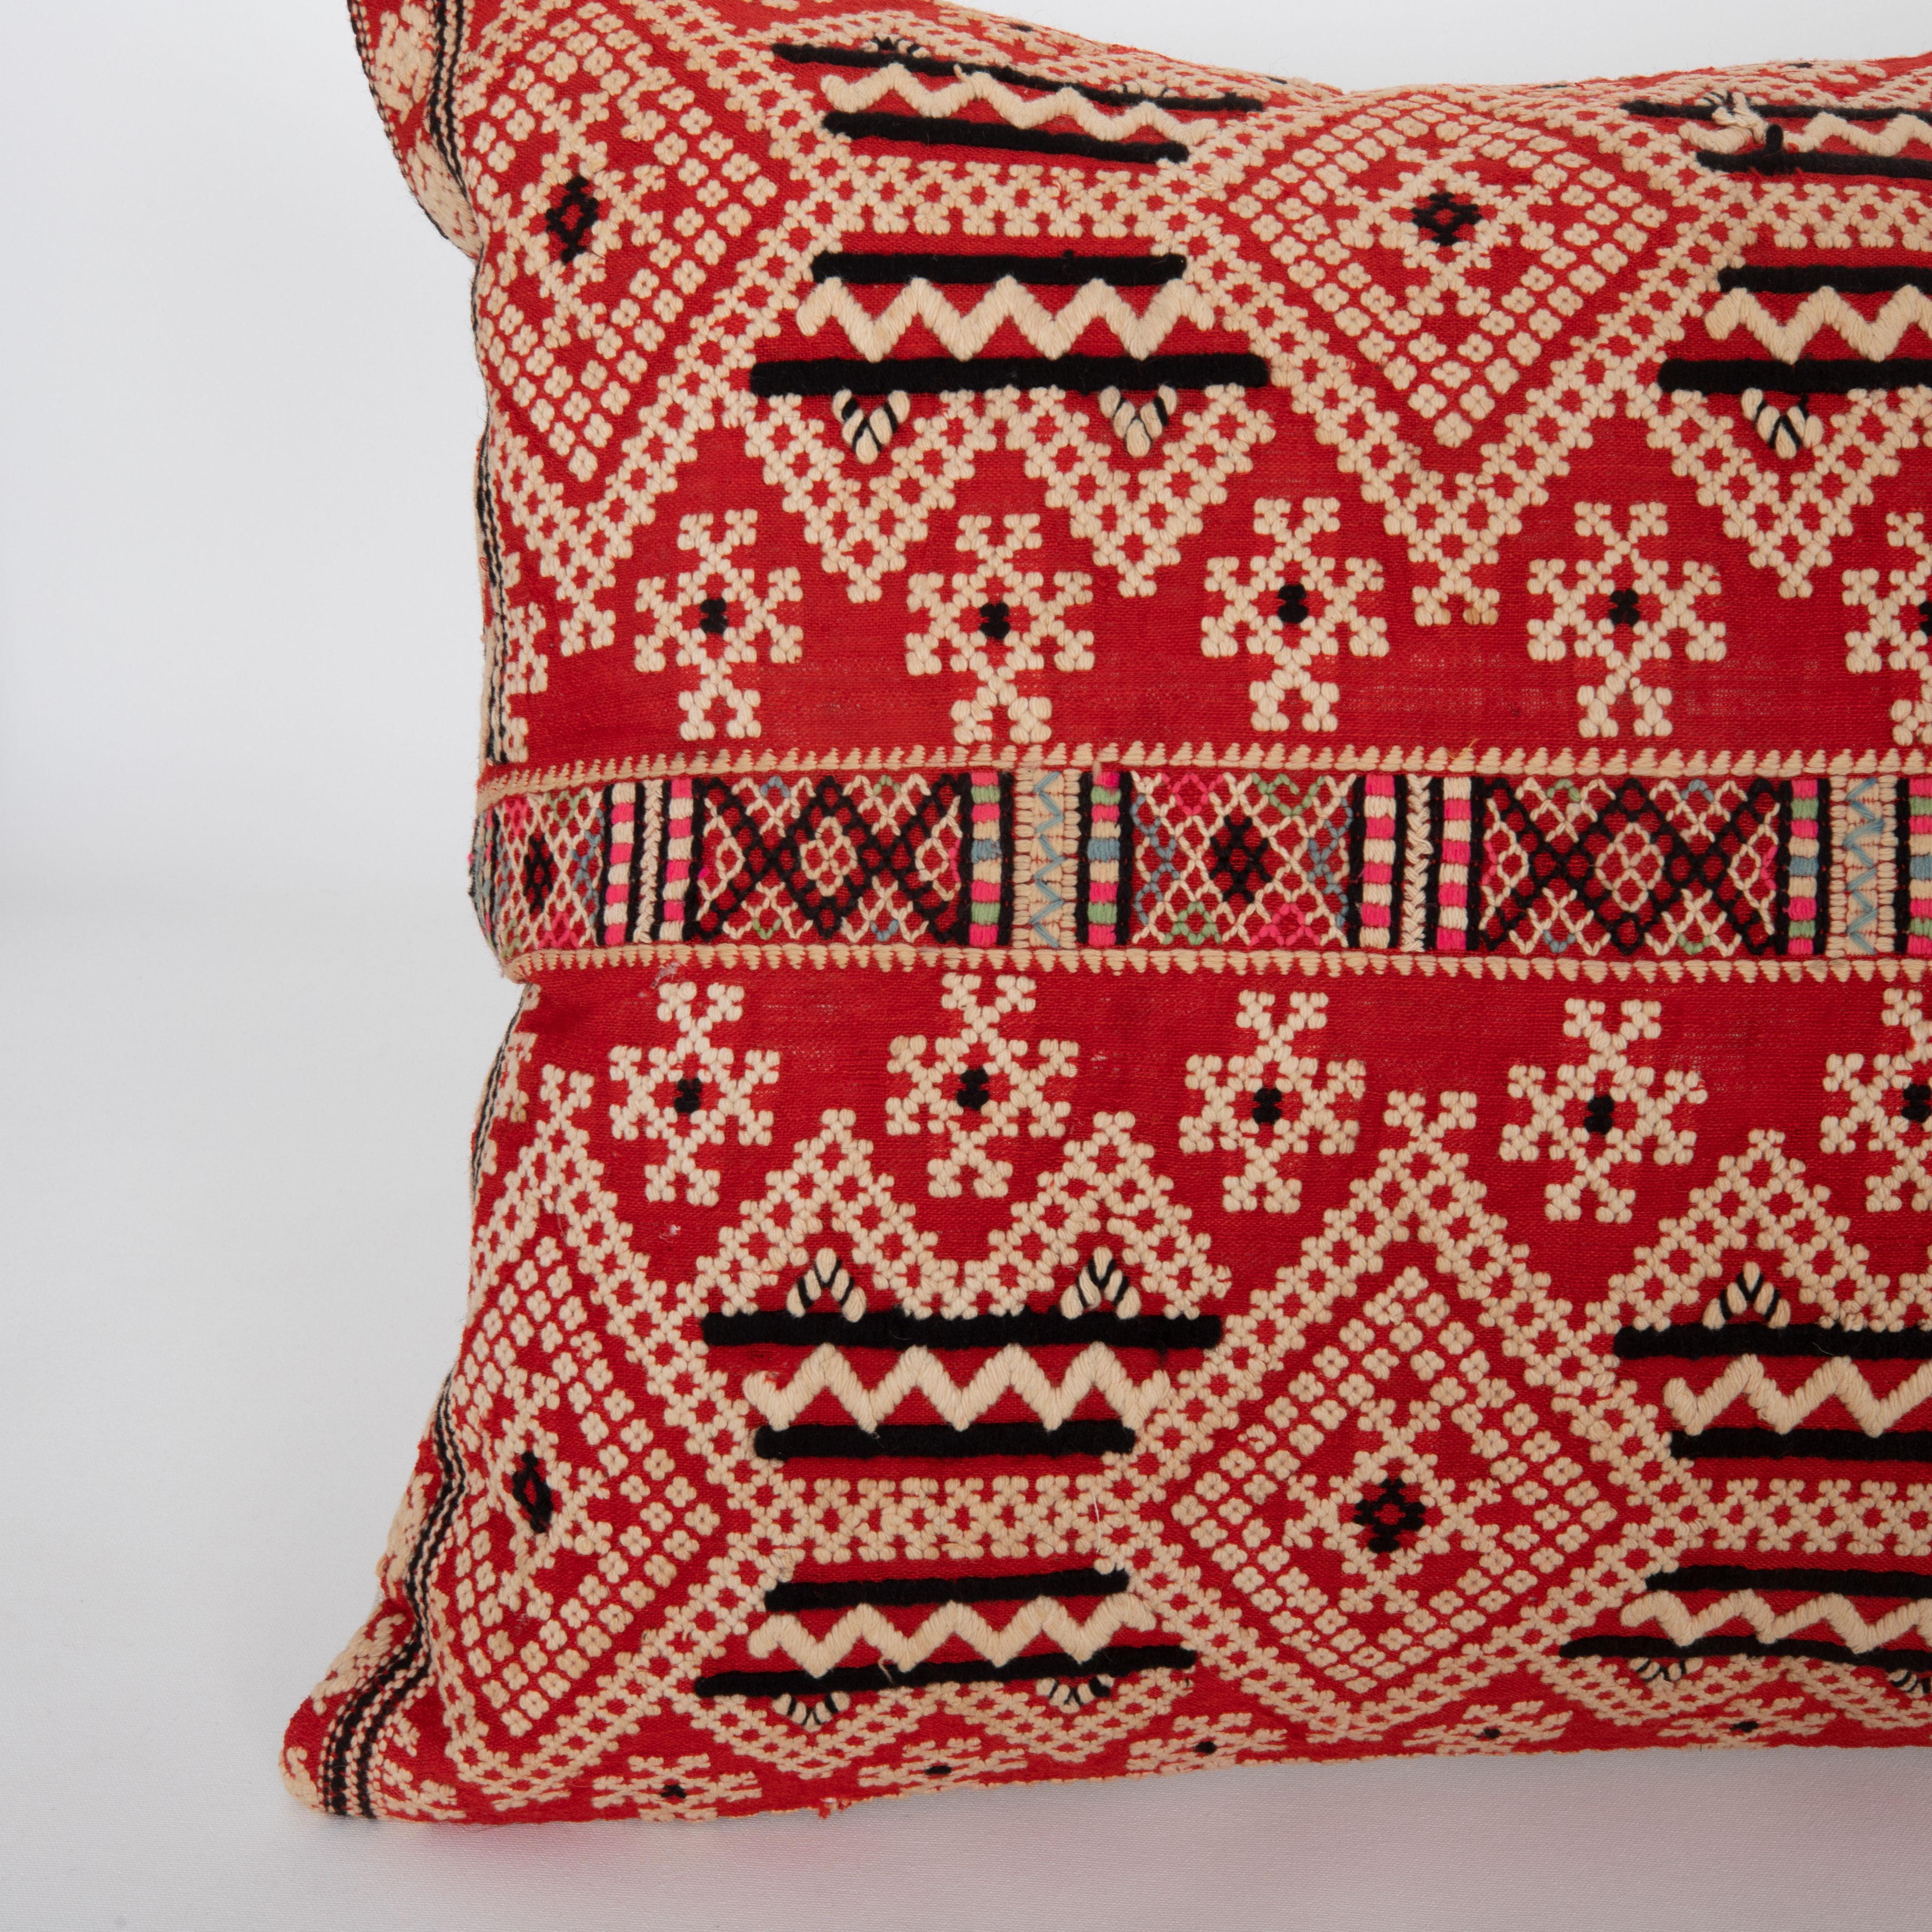 Bohemian Pillow Case Made From an Mid 20th C Eastern European Apron For Sale